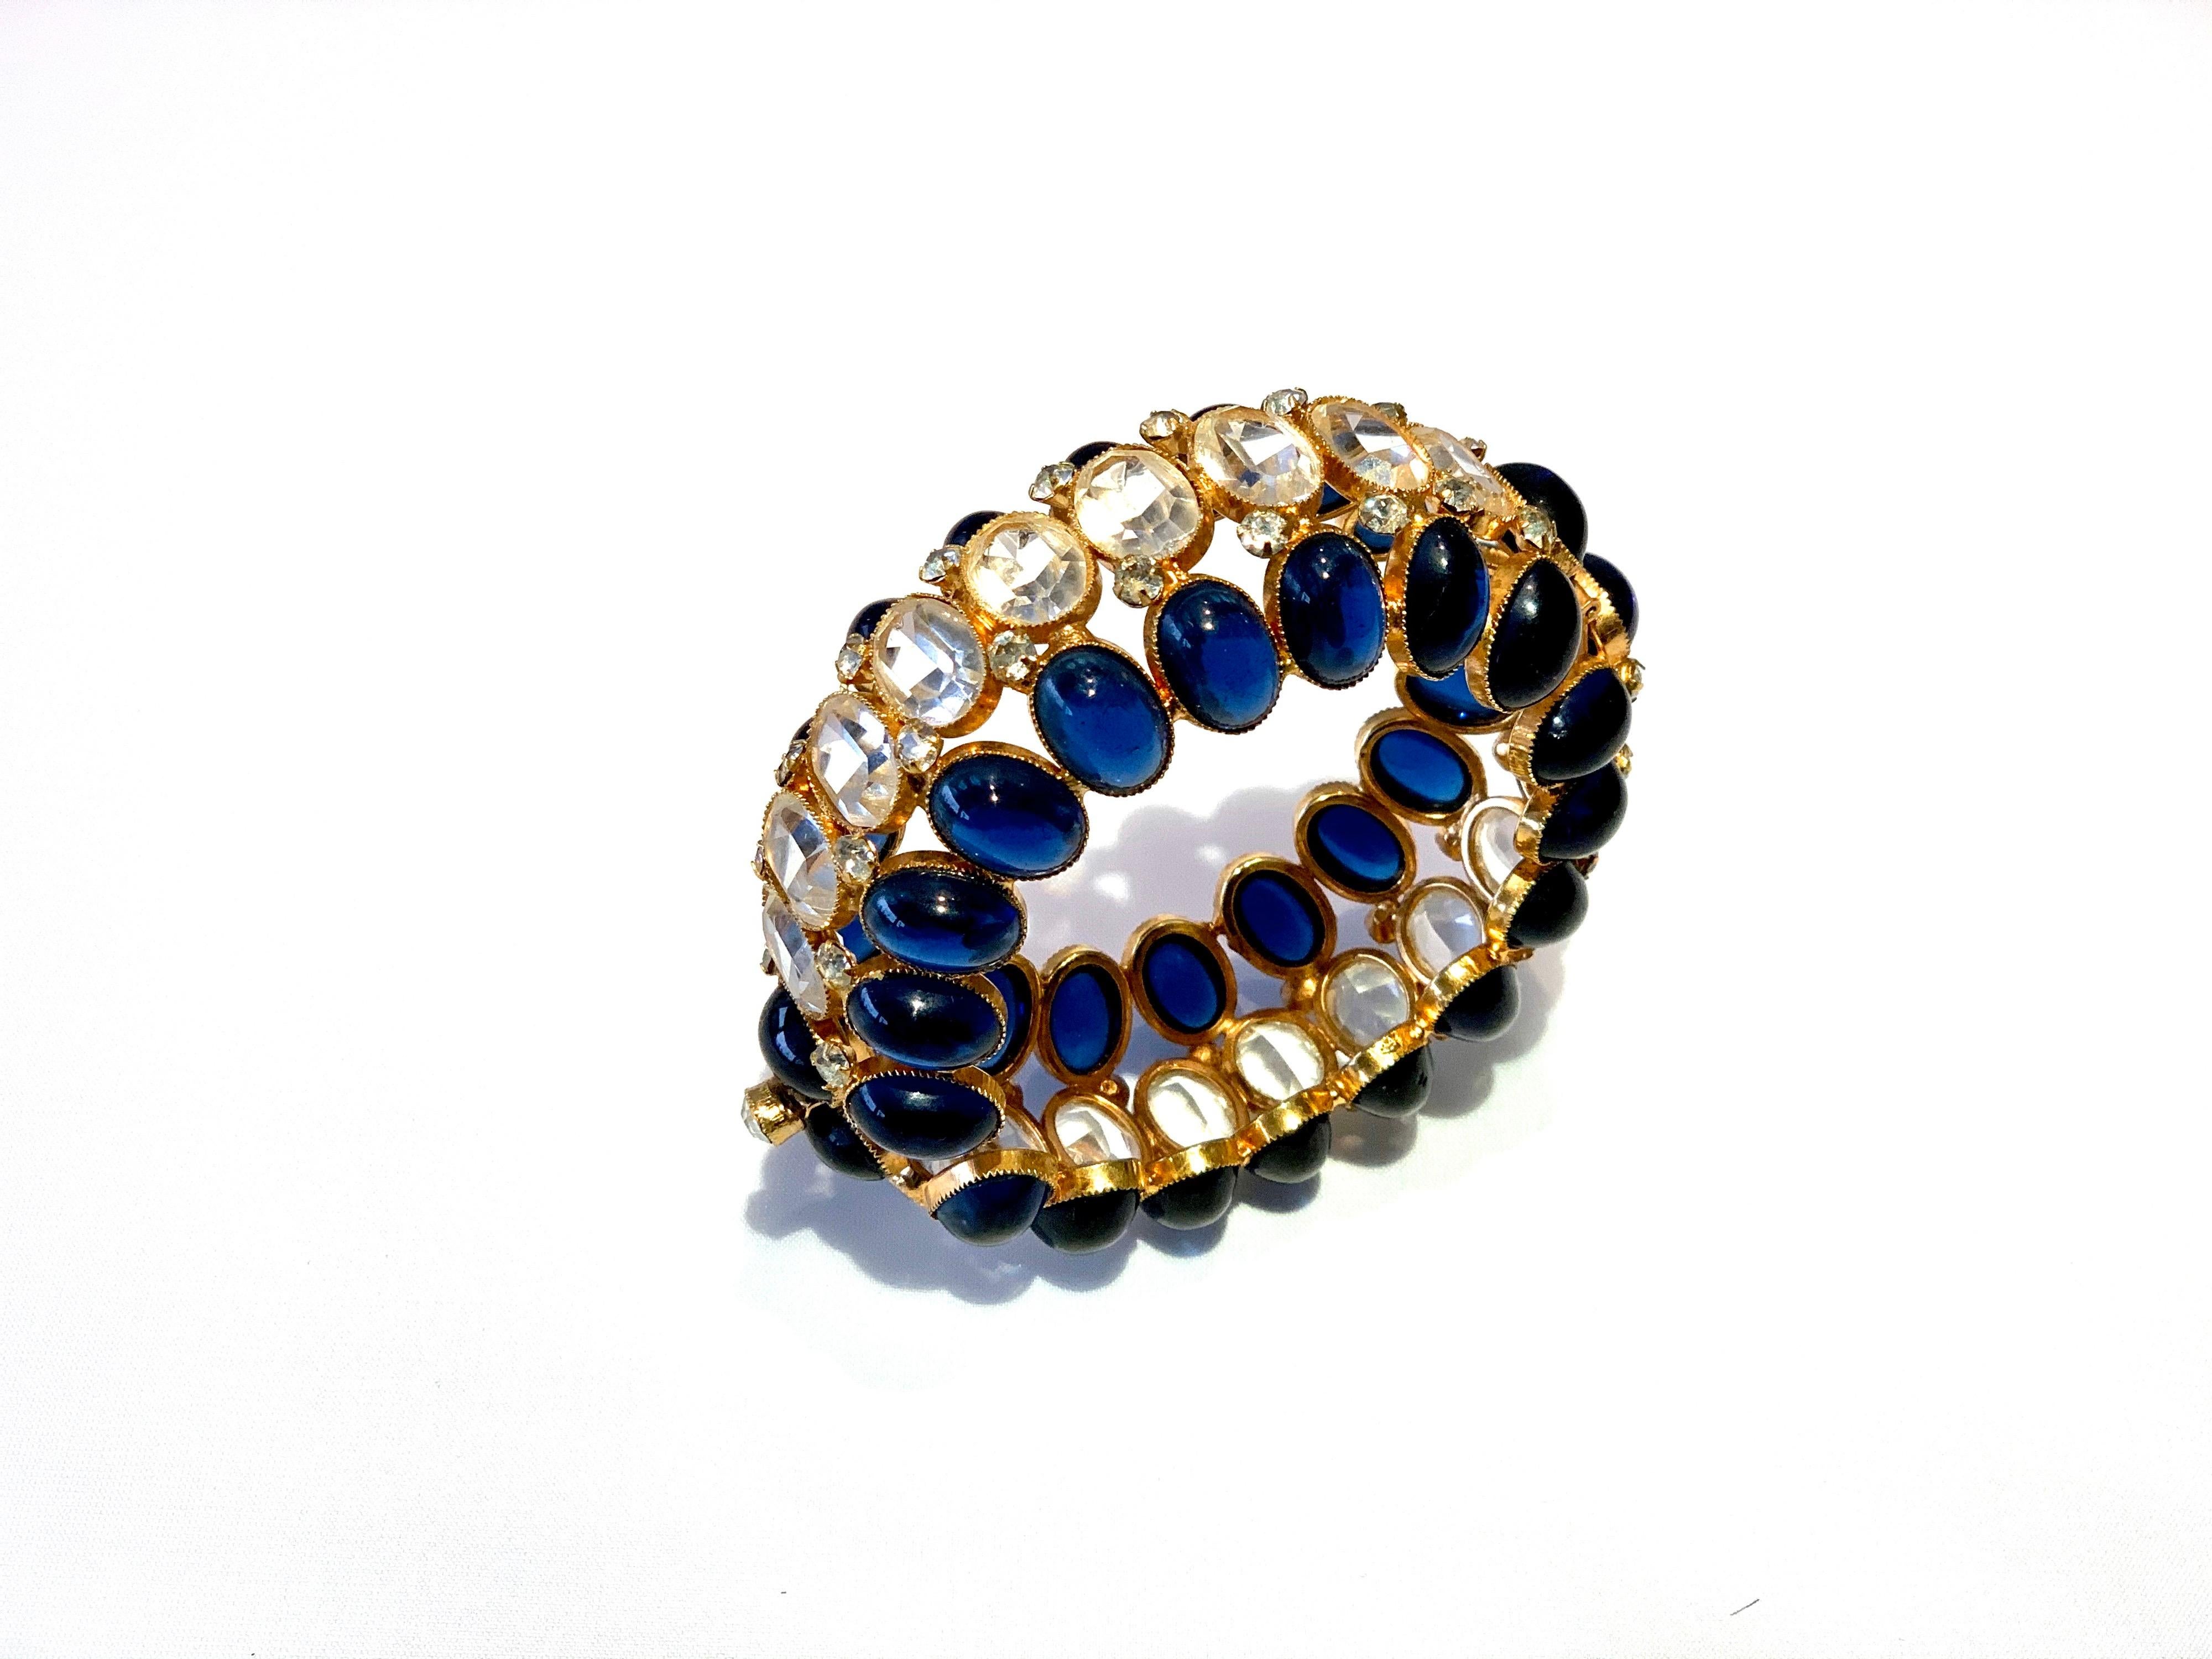 Vintage dramatic haute couture gilt sapphire diamante statement bangle/clamper bracelet - exquisitely crafted out of gilt metal and features three rows of stones. The top and bottom rows are covered by large faux sapphire oval cabochons - the center